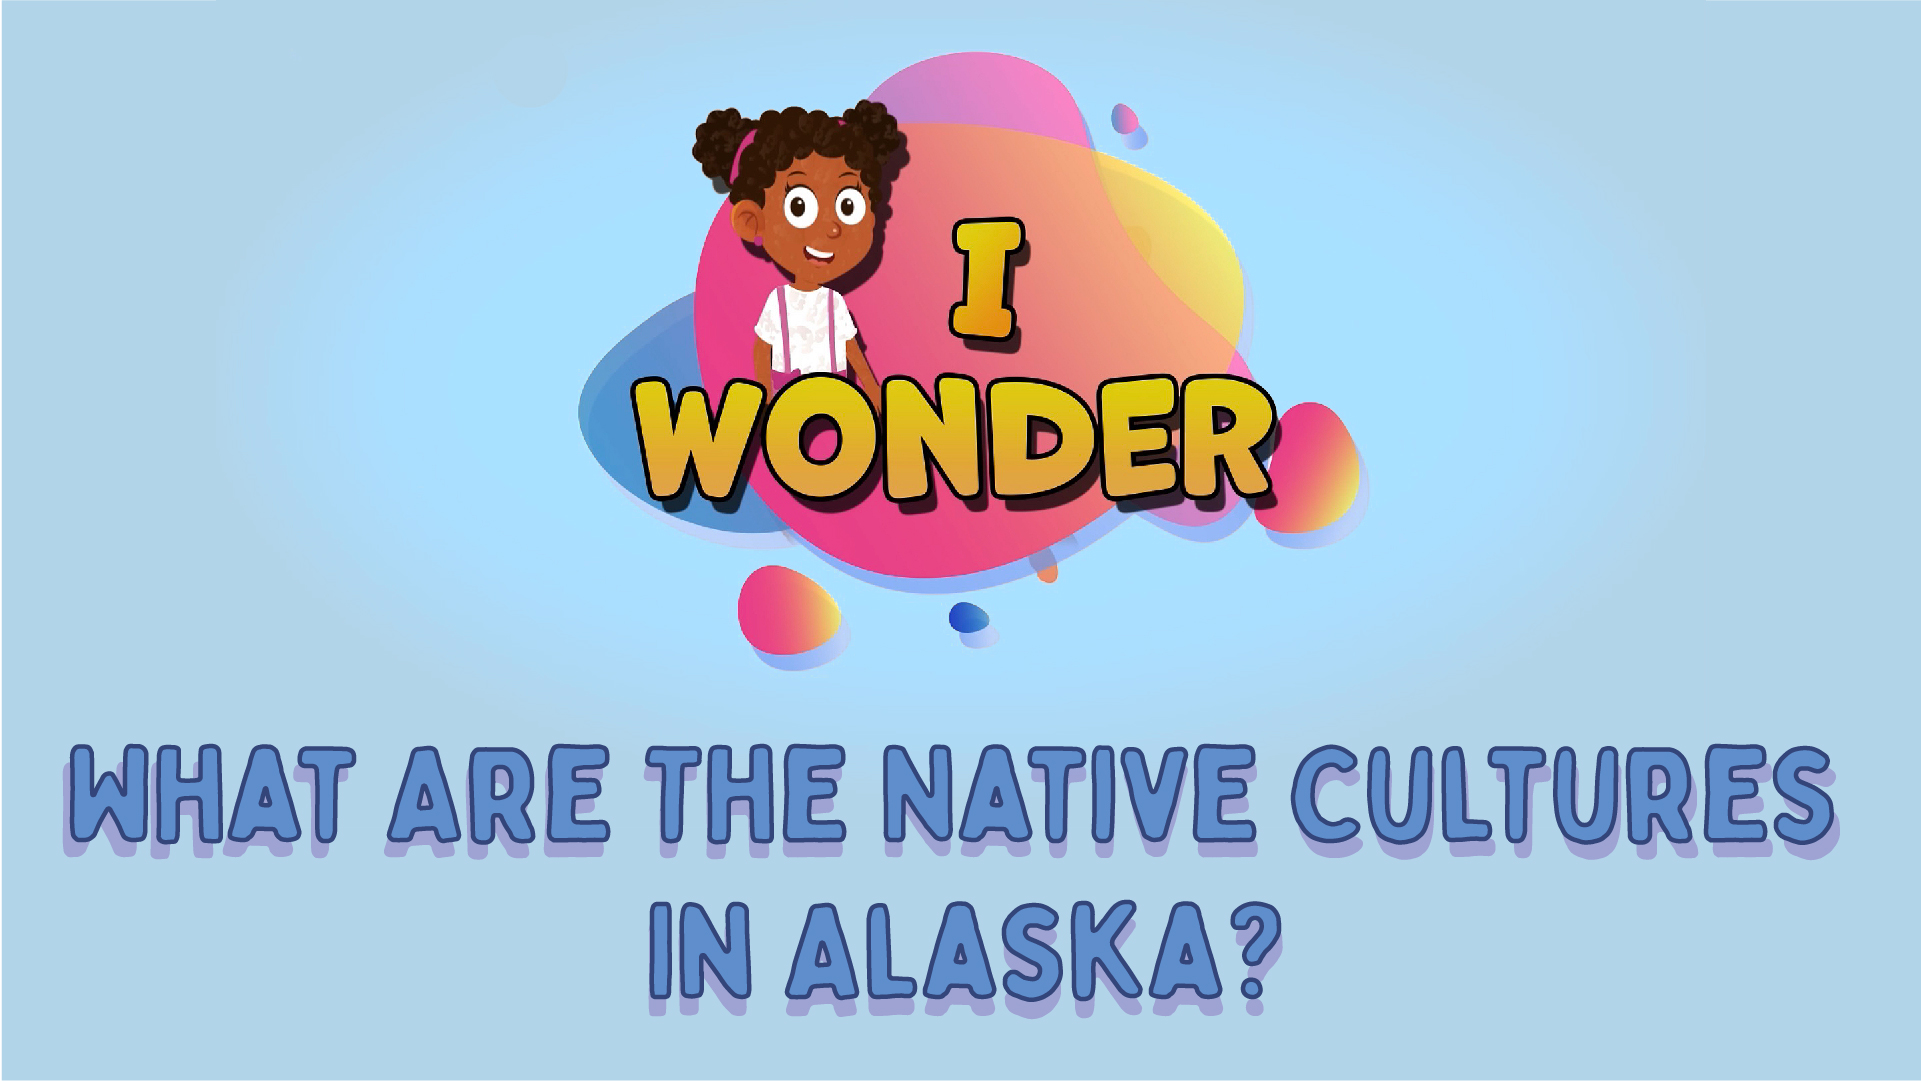 What Are The Native Cultures In Alaska?